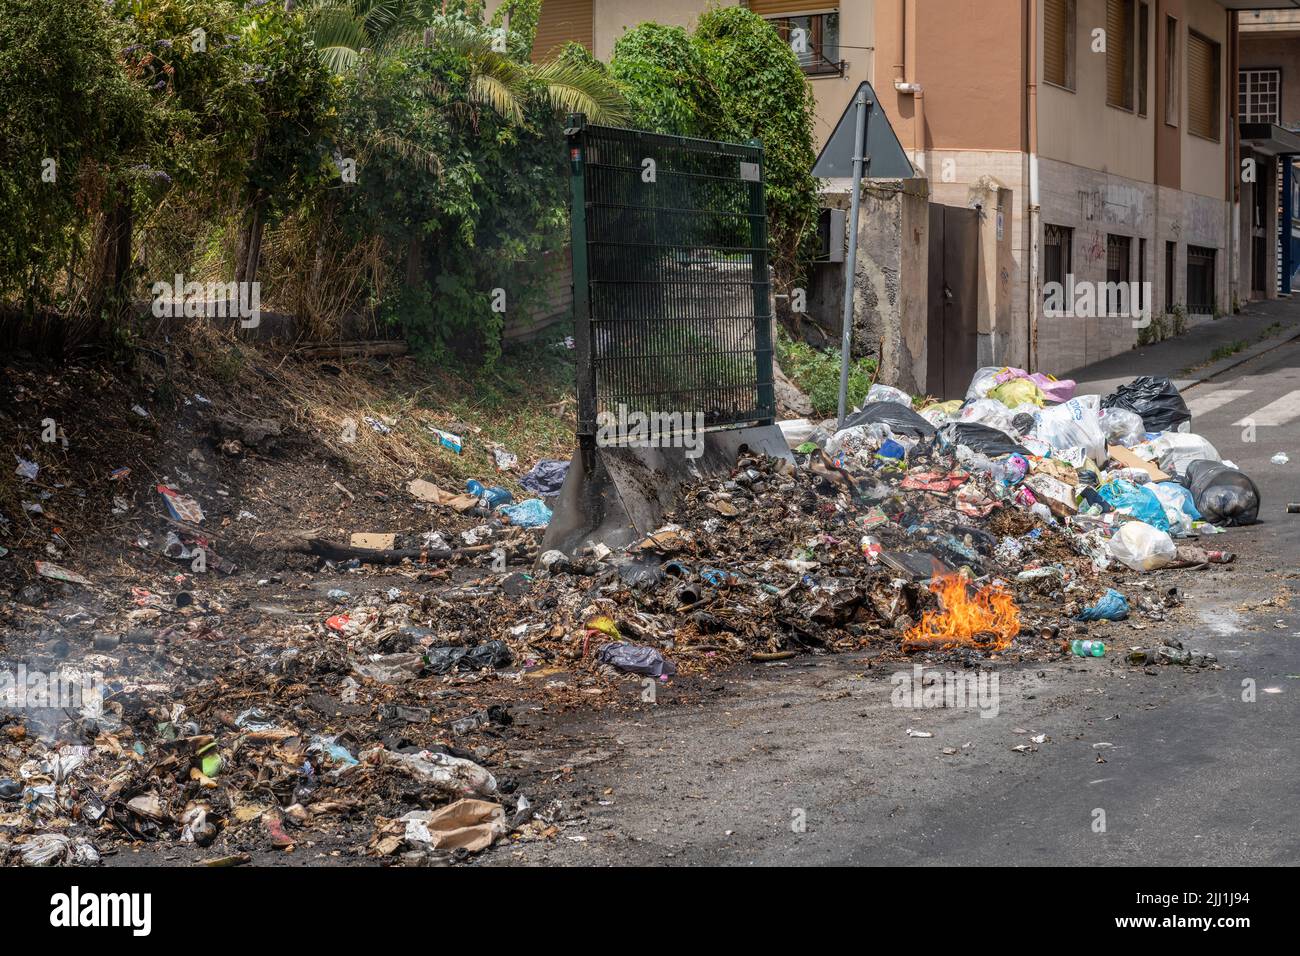 Domestic refuse burning on the street in Catania, Sicily, Italy. Proper waste disposal is a huge problem in the city and across much of Sicily Stock Photo